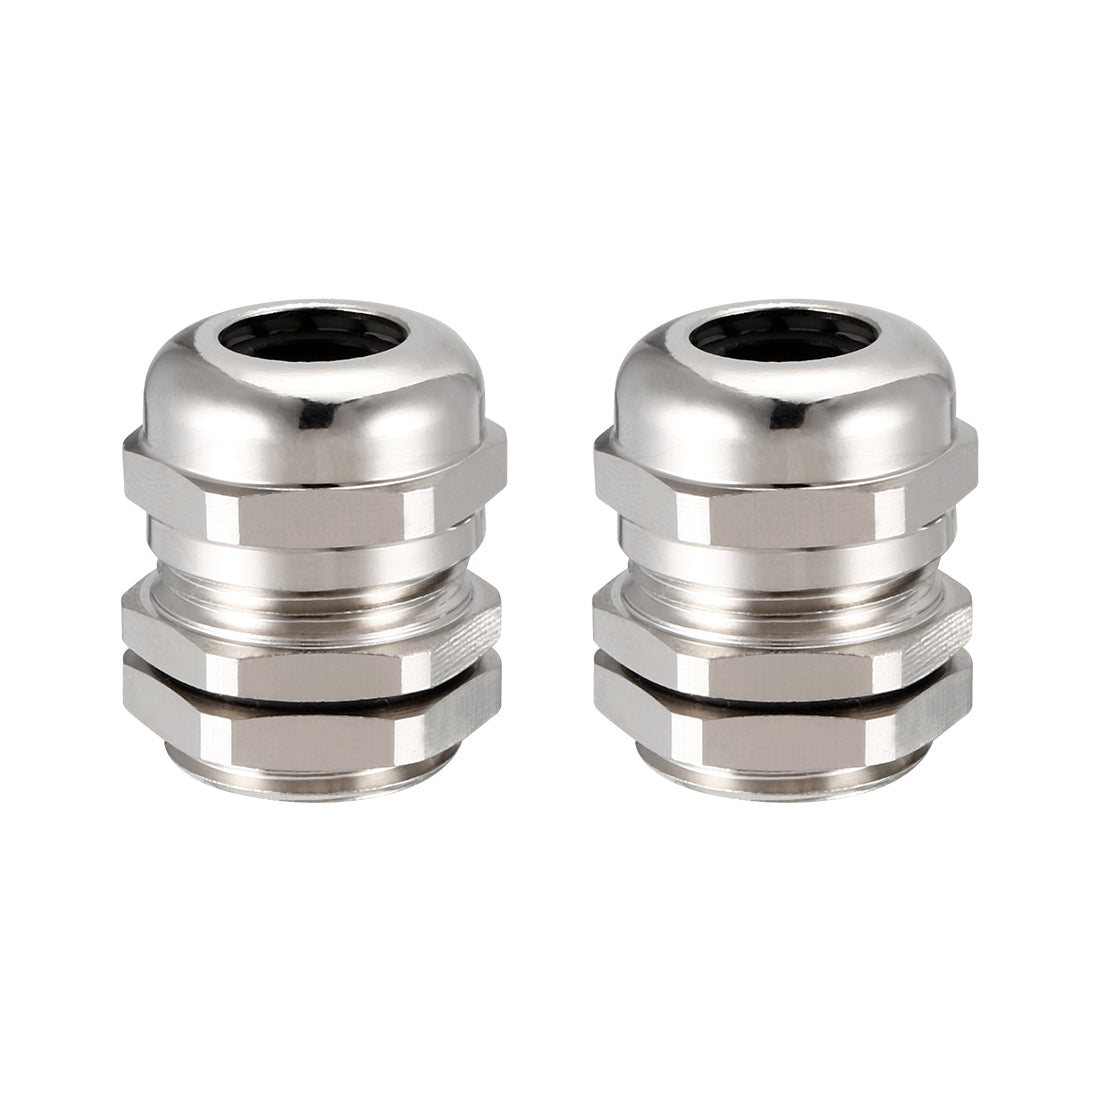 uxcell Uxcell M18 Cable Gland Waterproof Joint Adjustable Locknut Silver Tone for 5mm-10mm Dia Cable Wire 2 Pcs